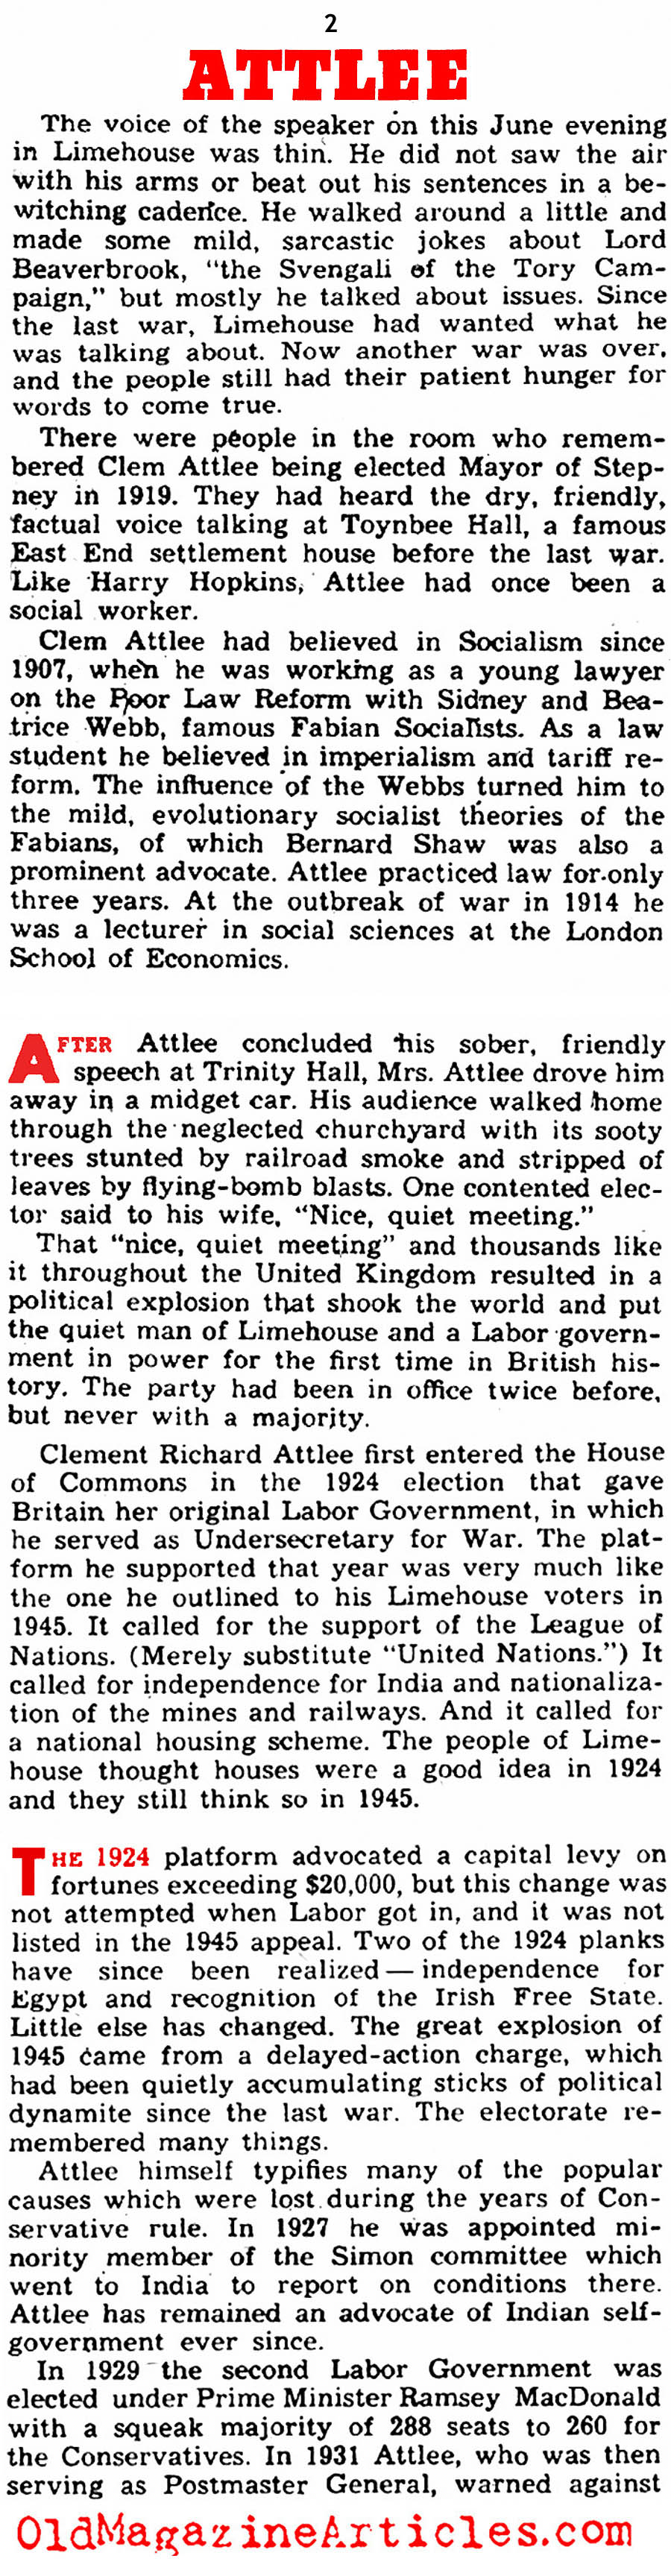  Post War Britain and Clement Atlee  (Yank  Magazine,  1945)